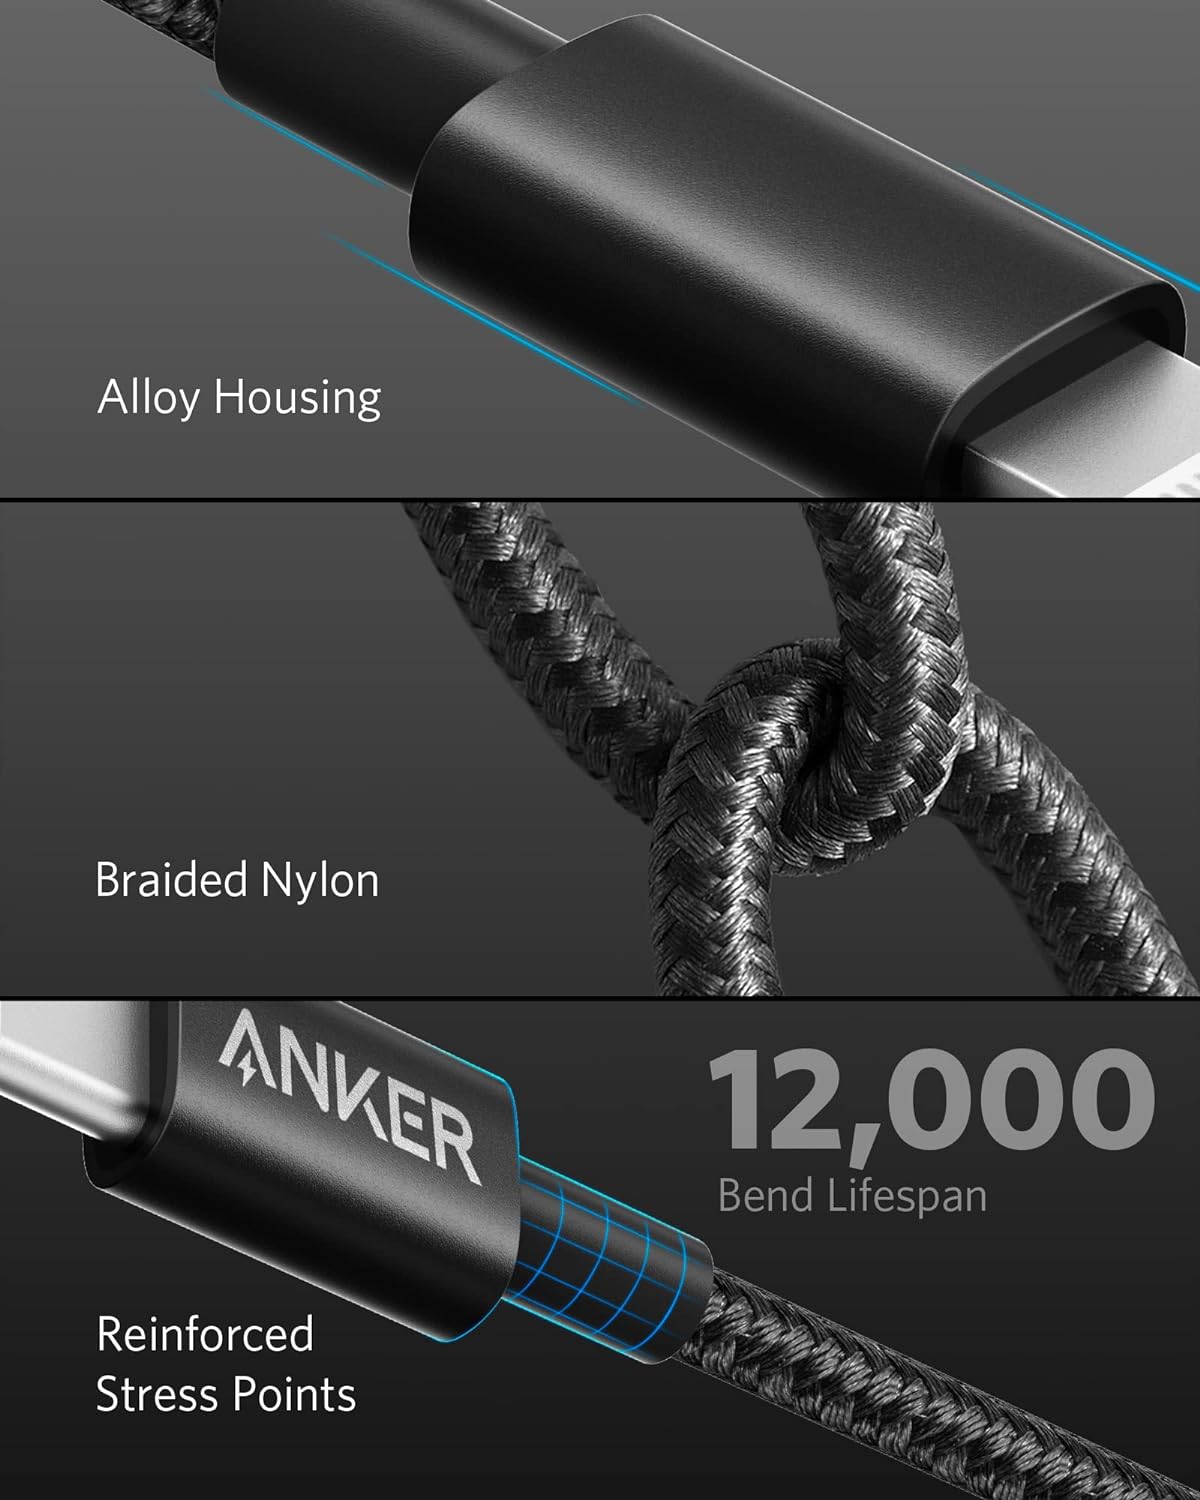 Anker New Nylon USB-C to Lightning Cable, 331 Lightning Charging Cord (Black, 2Pack, 6ft), MFi Certified for iPhone 13 13 Pro 12 Pro Max 12 11 X XS XR 8 Plus, AirPods Pro, Supports Power Delivery